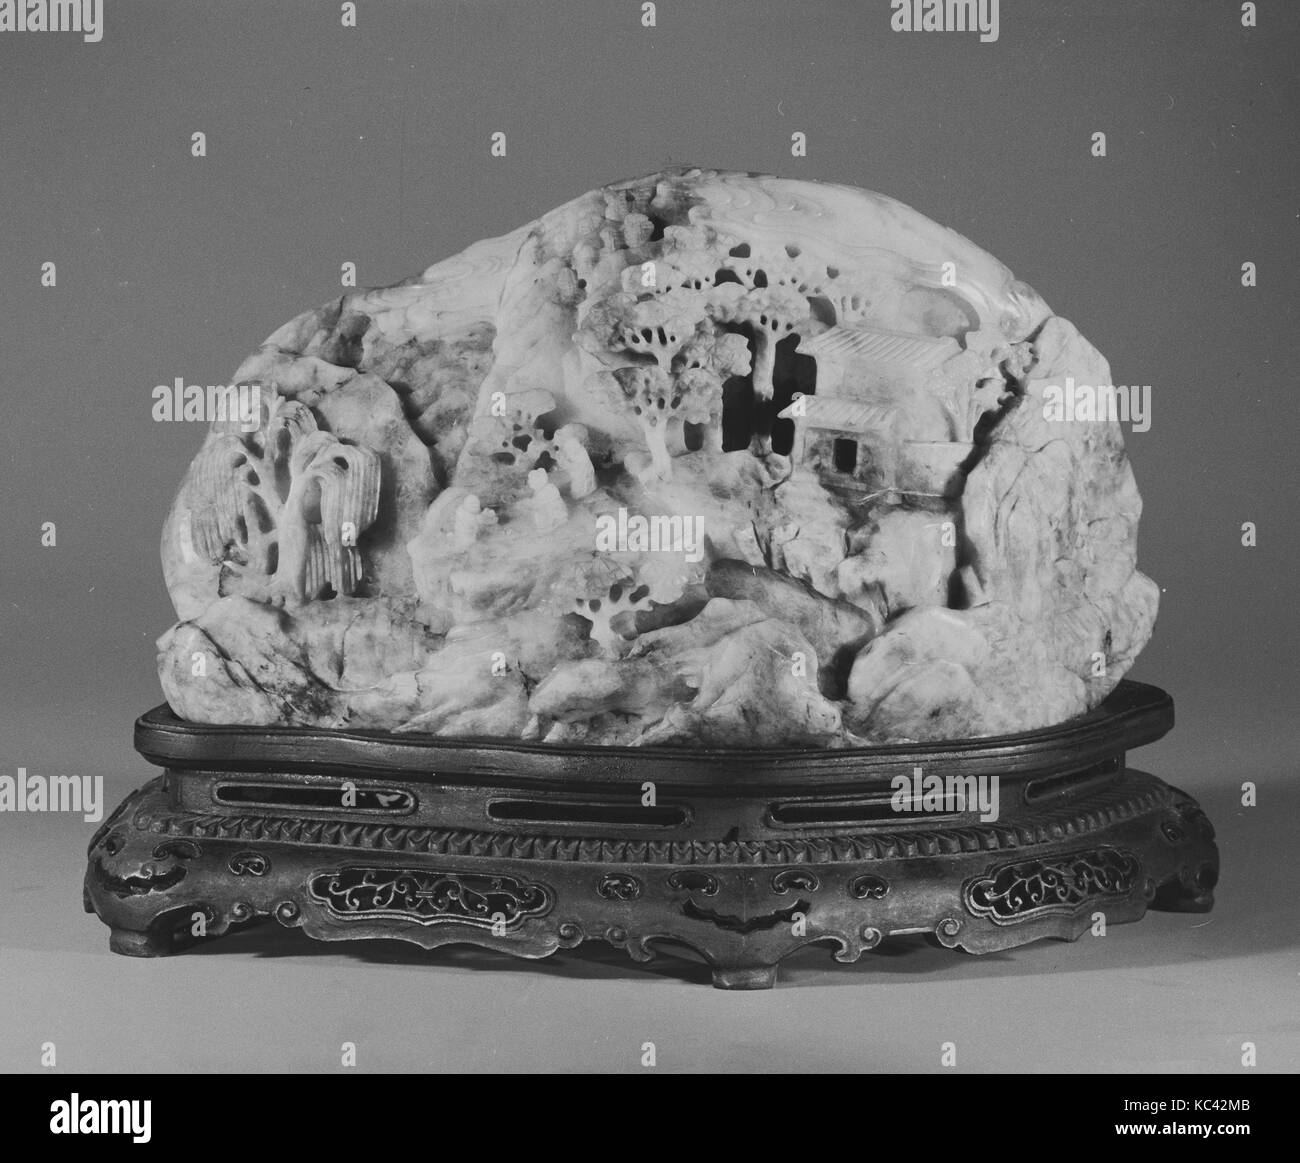 Mountain, 19th century, China, Jade, H. 4 1/2 in. (11.4 cm); H. (with stand) 6 in. (15.2 cm); L. 8 1/8 in. 20.6 cm), Jade Stock Photo